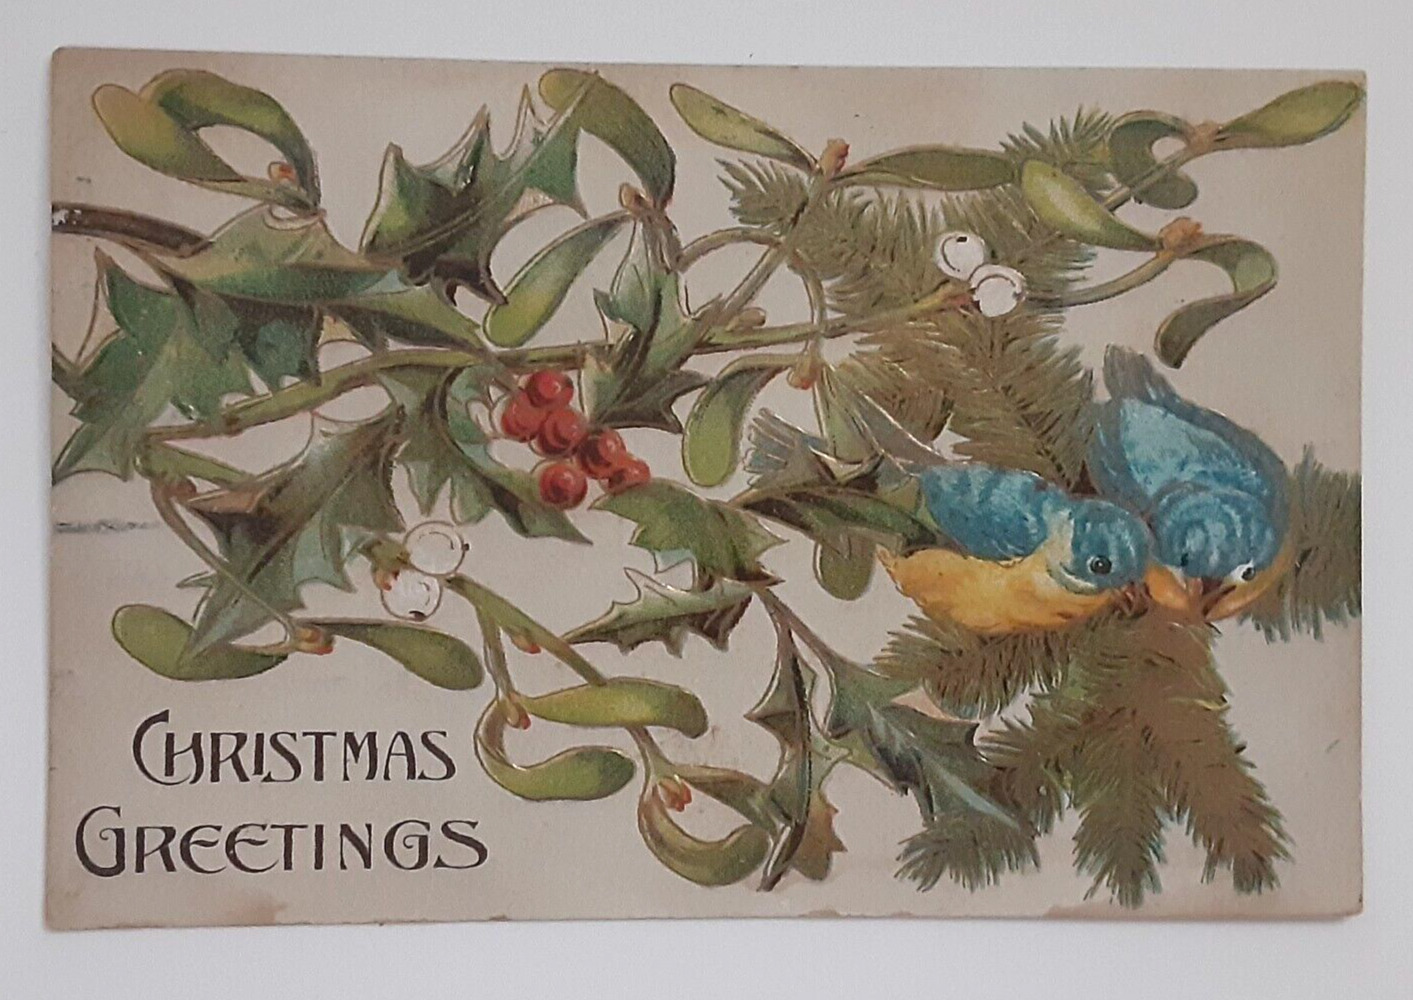 1911 Christmas Greetings Foil Embossed Postcard Antique Early Century Post Card